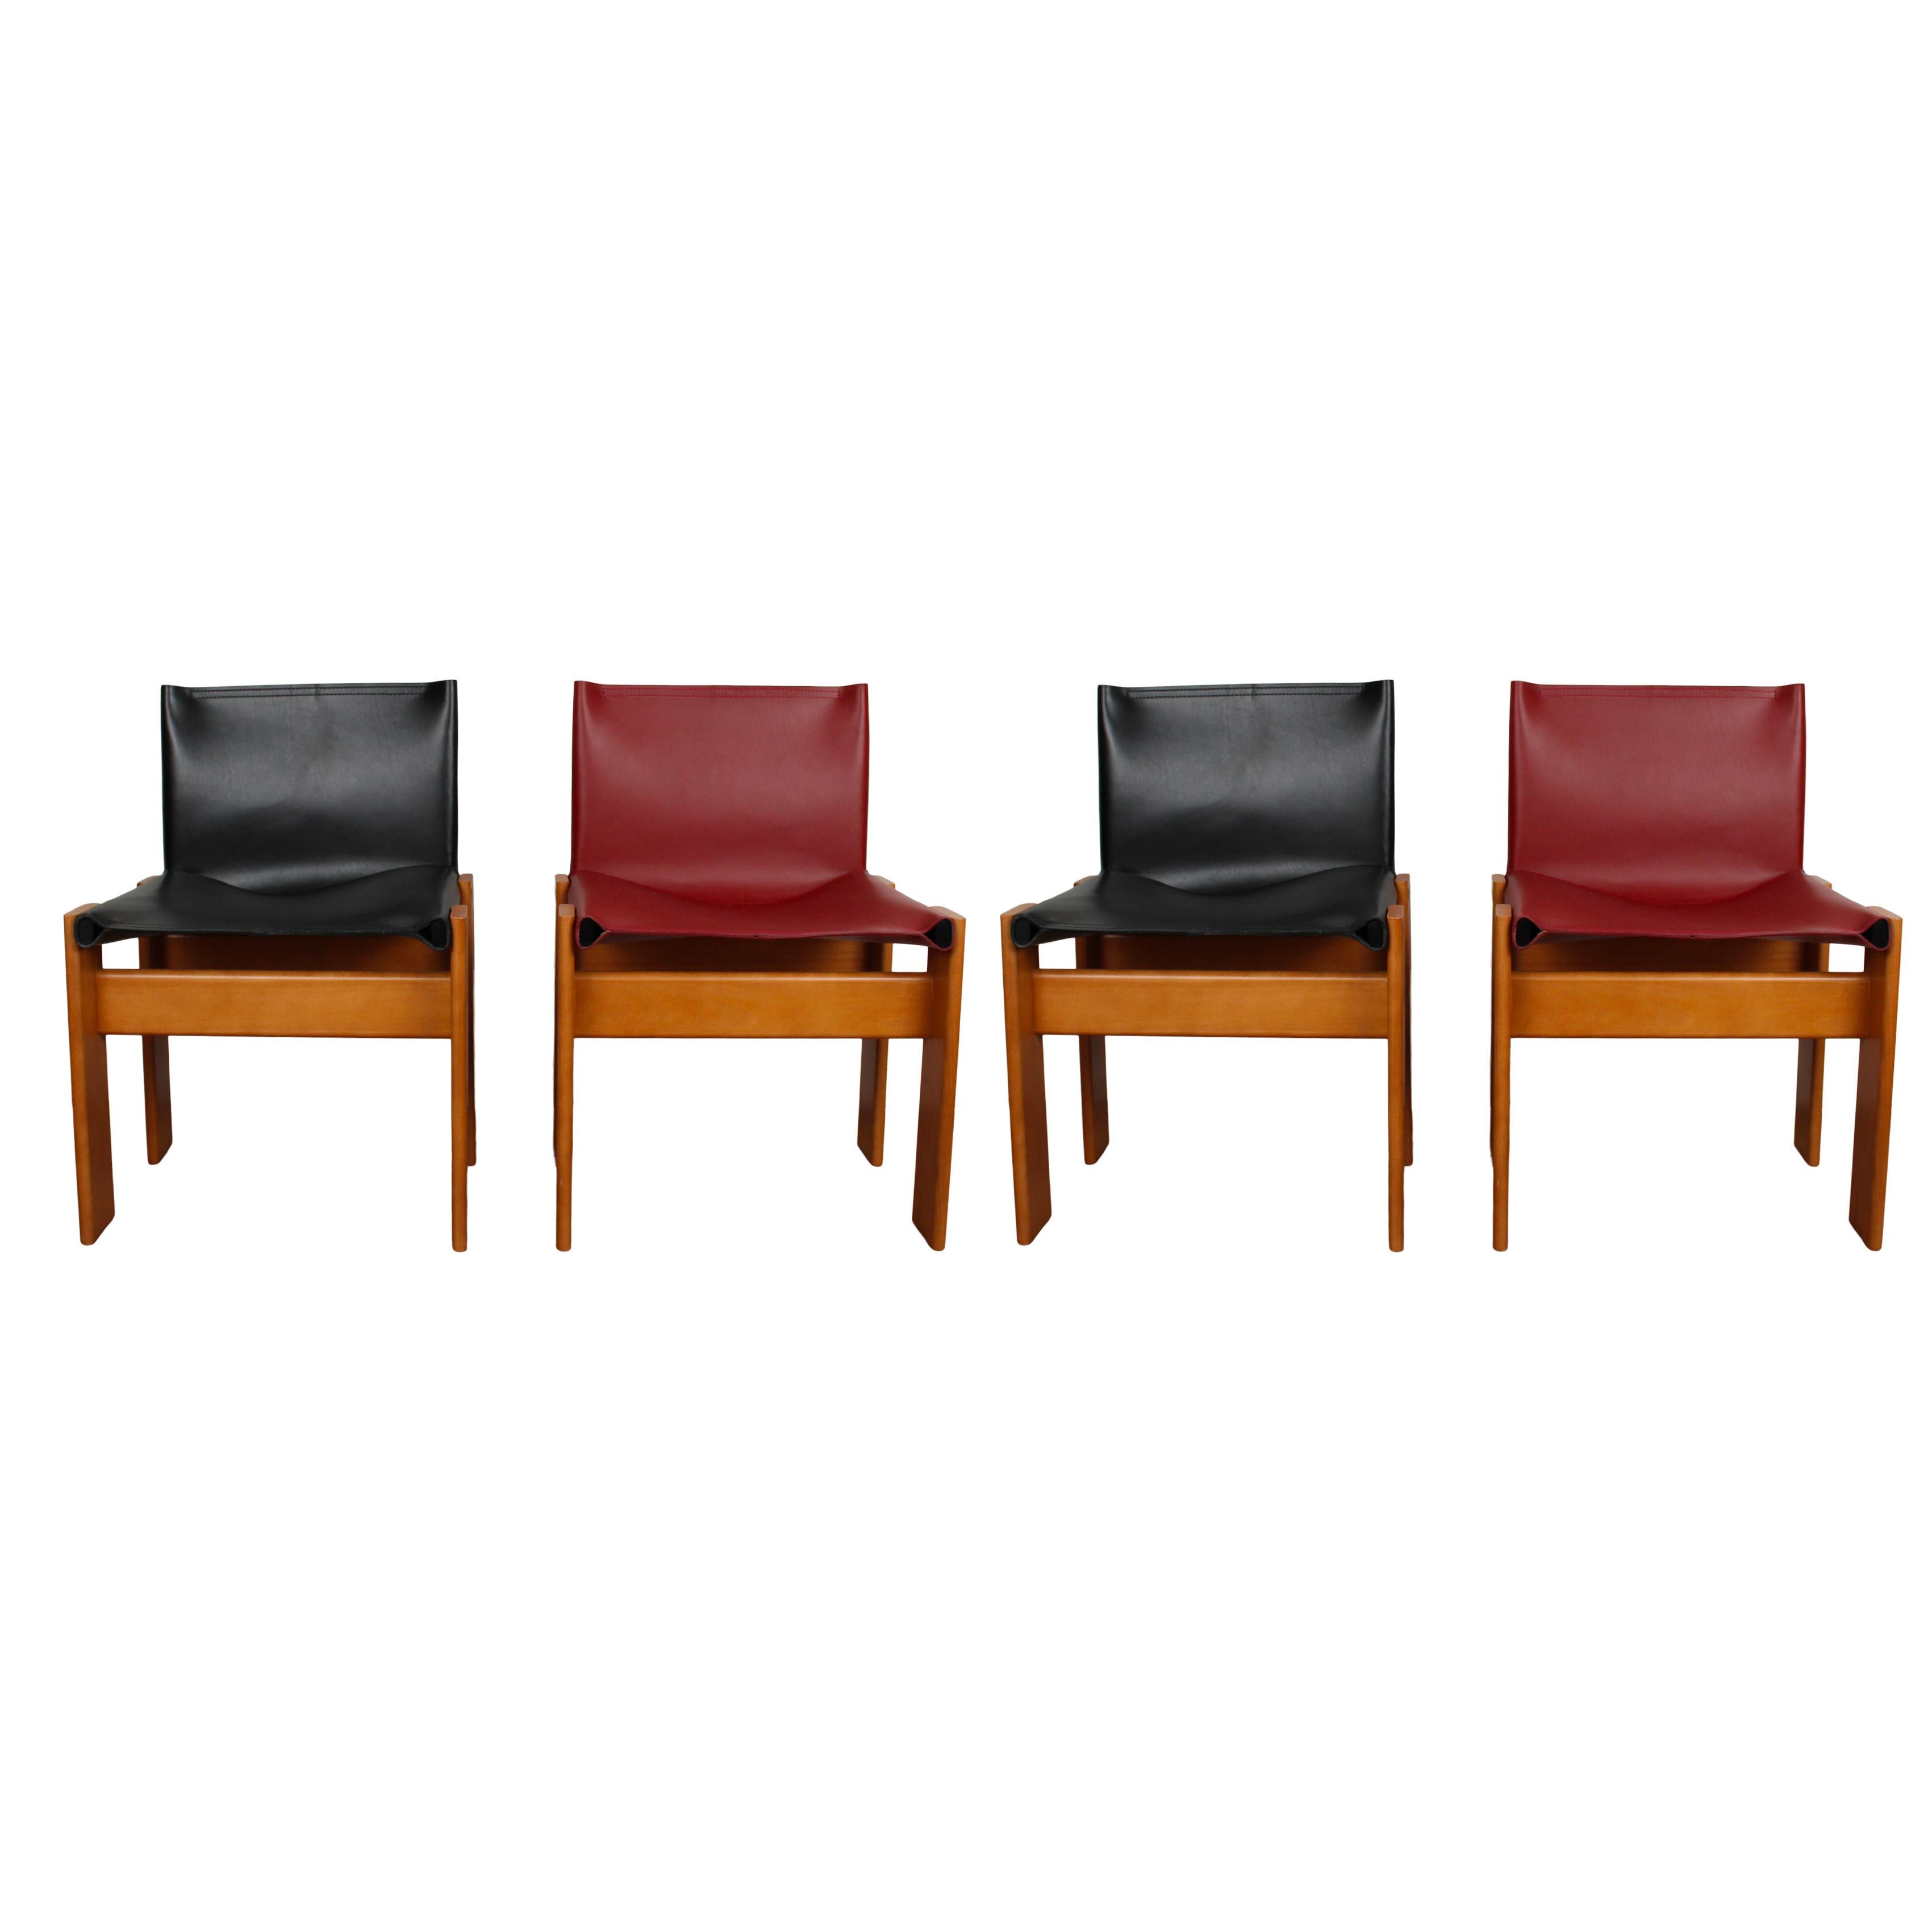 Italian Afra & Tobia Scarpa Black & Red Leather Monk Dining Chair for Molteni, Set of 4 For Sale